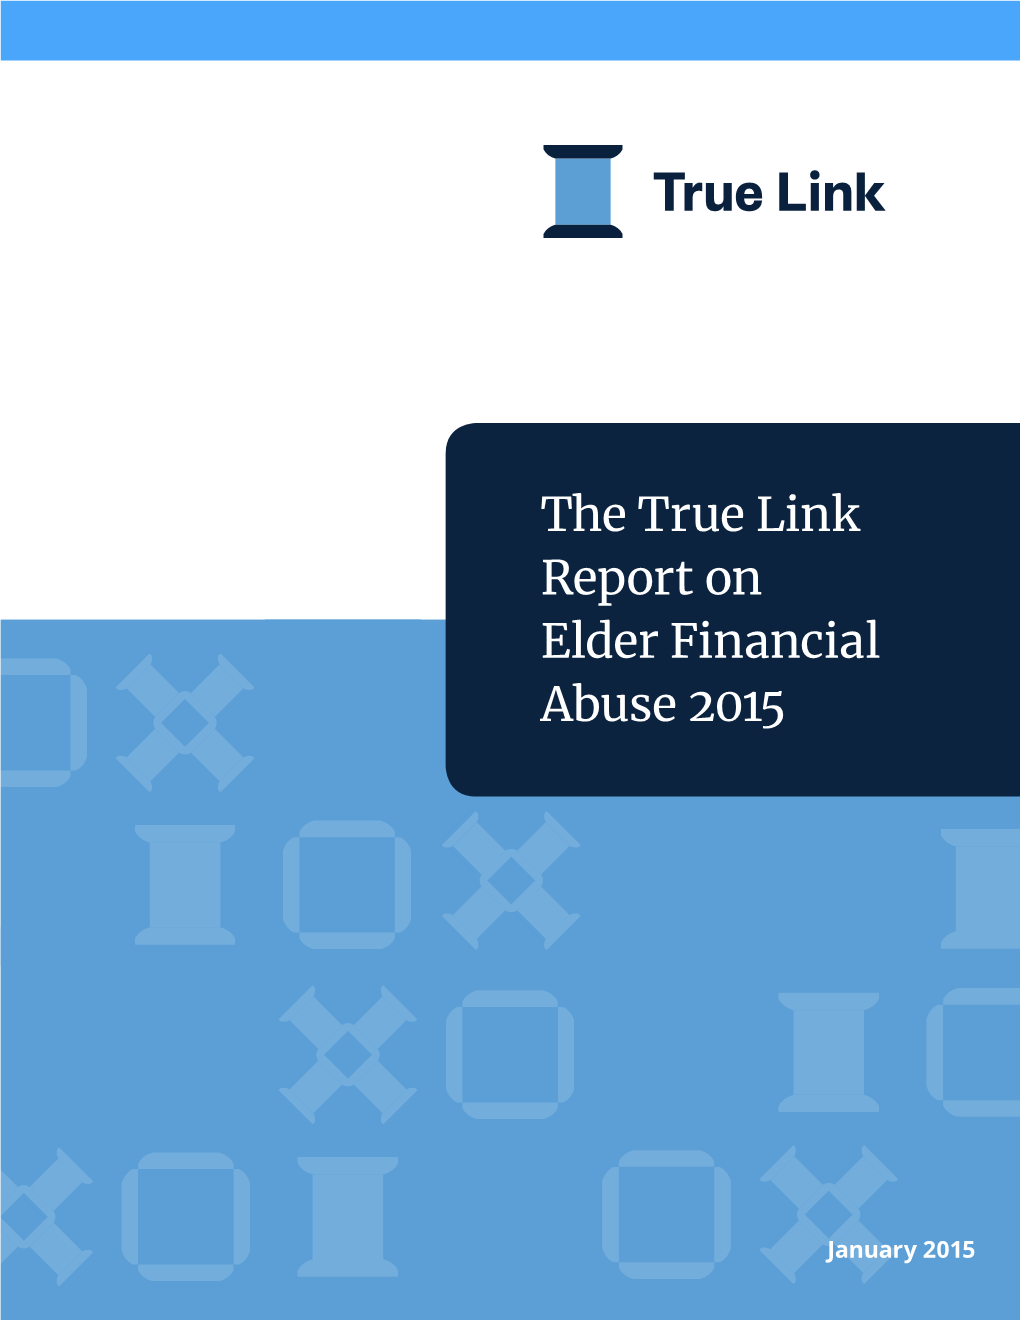 The True Link Report on Elder Financial Abuse 2015